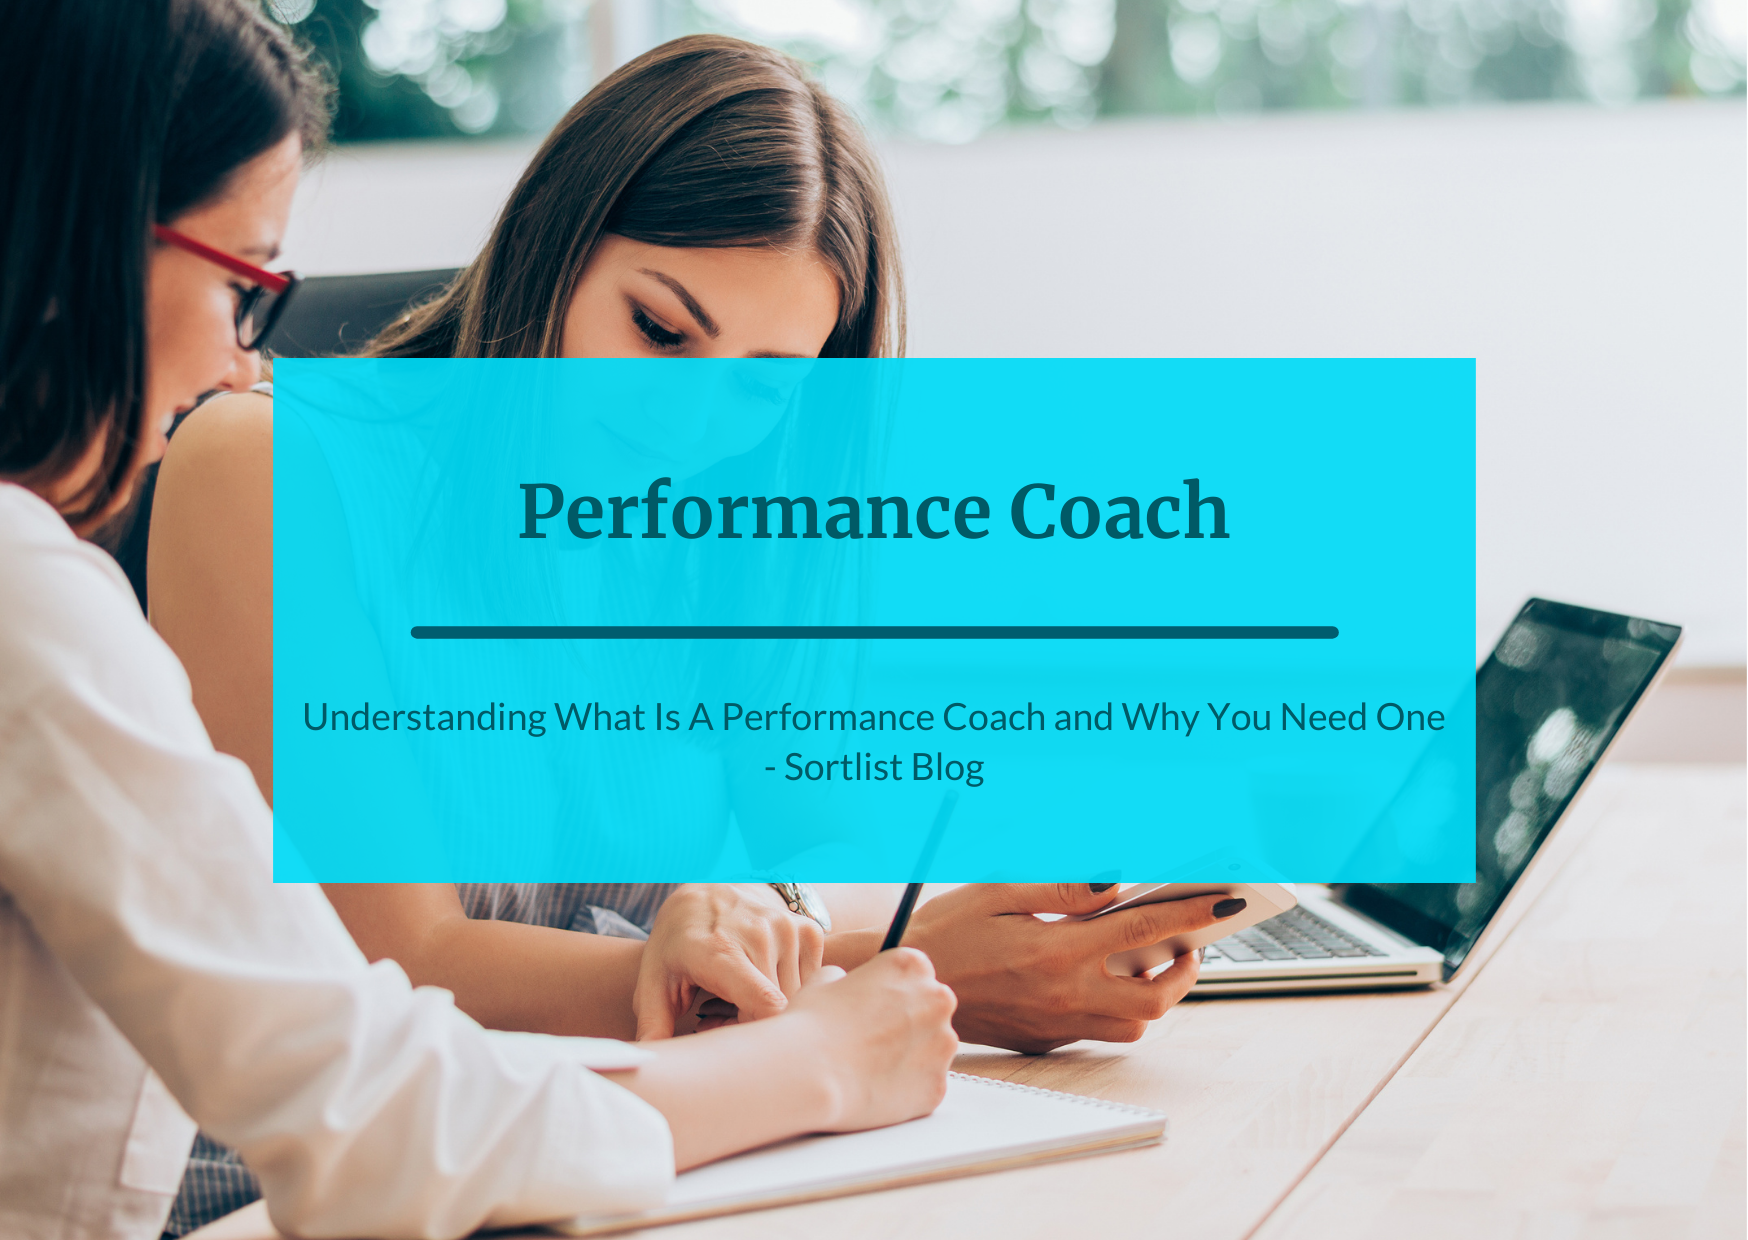 Understanding What Is A Performance Coach and Why You Need One